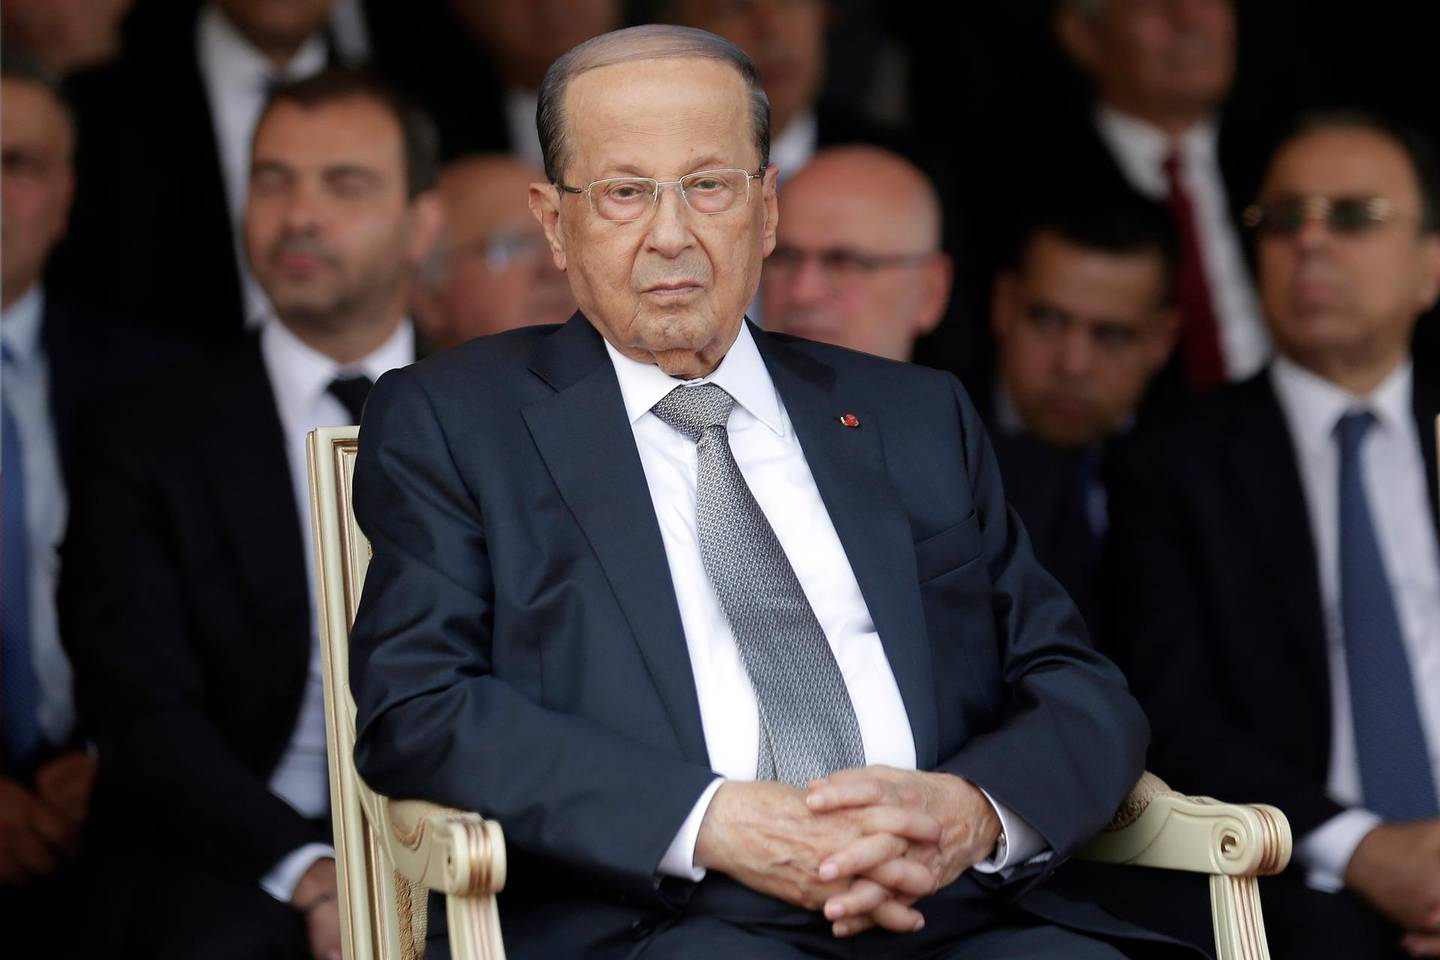 FILE - In this Aug. 1, 2019 file photo, Lebanese President Michel Aoun attends a graduation ceremony marking the 74th Army Day, at a military barracks in Beirut's suburb of Fayadiyeh, Lebanon. Aoun said Saturday, Aug. 24,  his country will emerge from its difficult economic conditions by making decisions that boost production, and a top politician said politicians will be called for a meeting â€œto discuss the challenges.â€ His comments came a day after Fitch Ratings downgraded Lebanon's long-term foreign currency issuer default rating to CCC from B-. (AP Photo/Hassan Ammar, File)